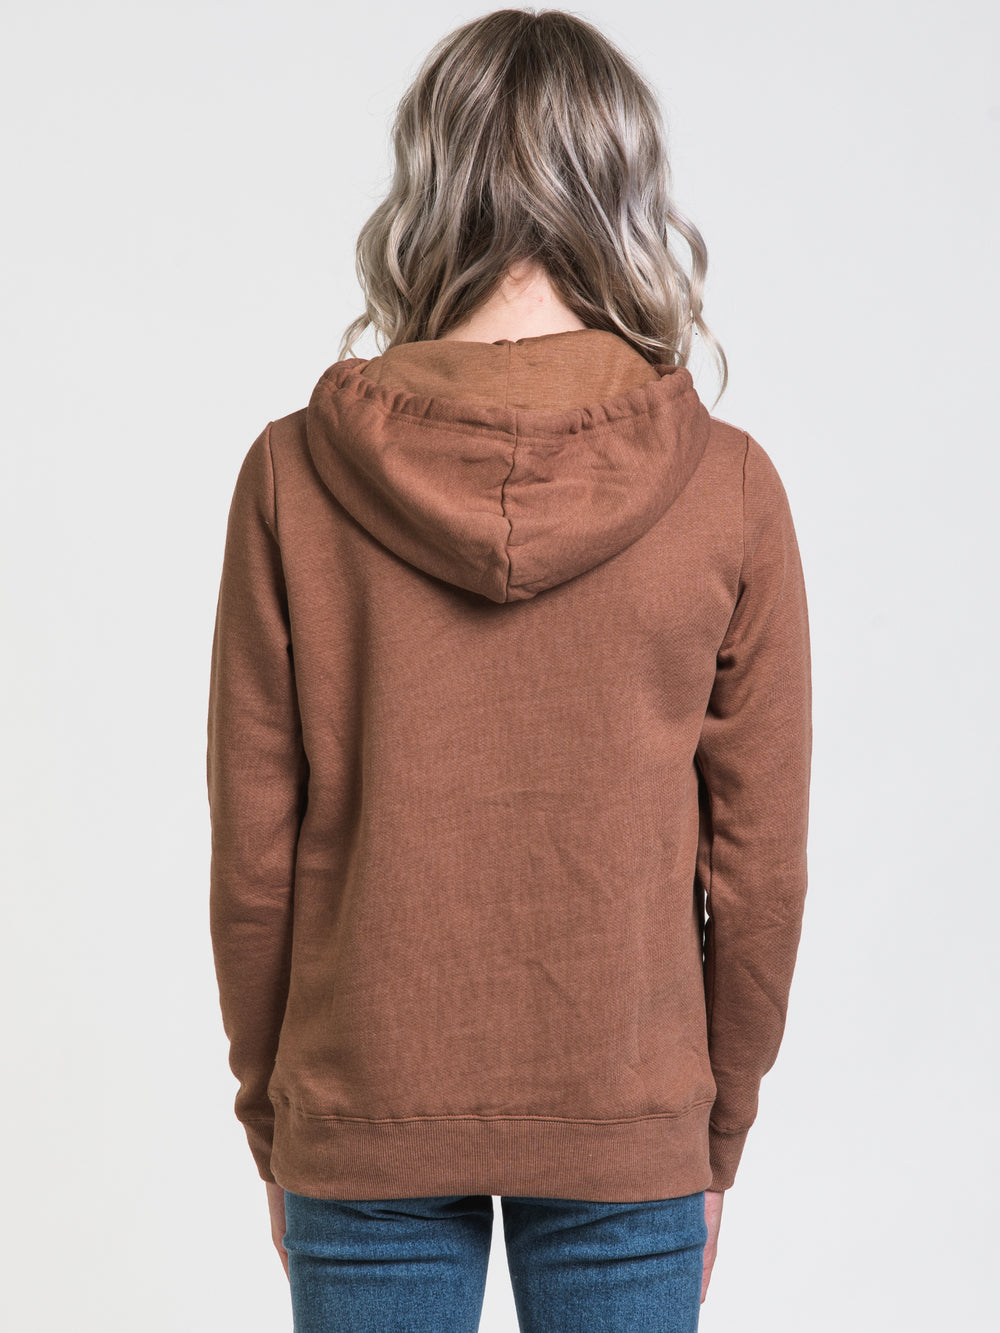 TENTREE LEFT CHEST JUNIPER HOODIE  - CLEARANCE